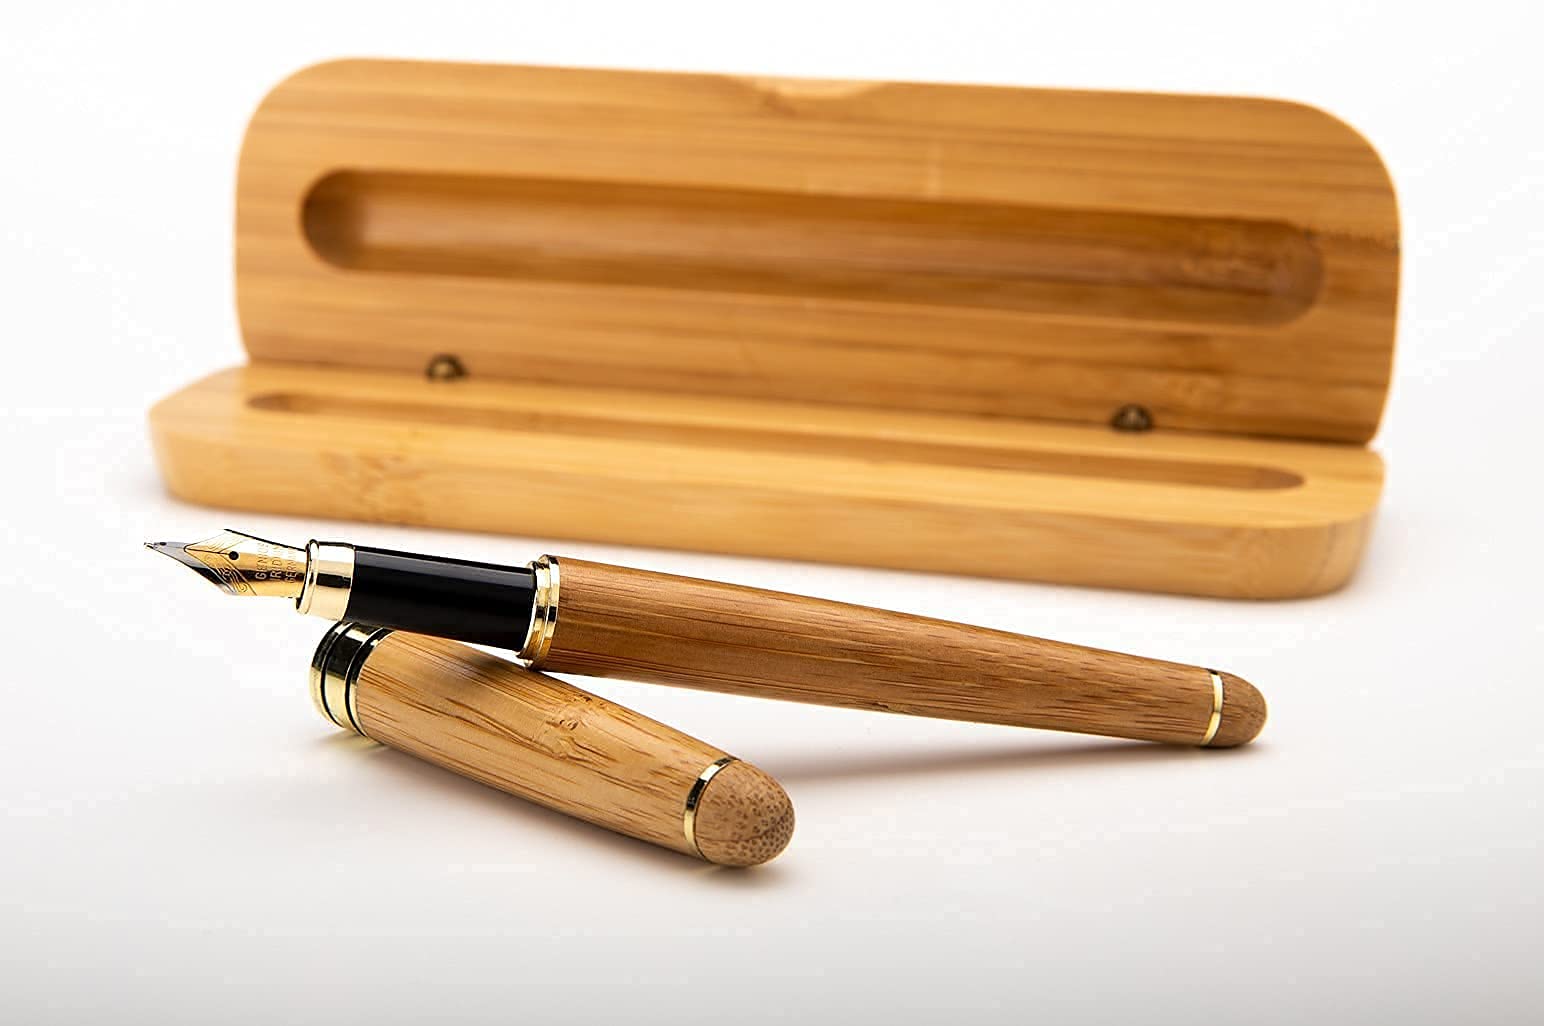 Dryden Designs Luxury Bamboo Fountain Pen with Ink Refill Converter and Matching Gift Case - Smooth & Elegant, Gift Set for Calligraphy Writing, Signature, Journal, Artist and Professionals